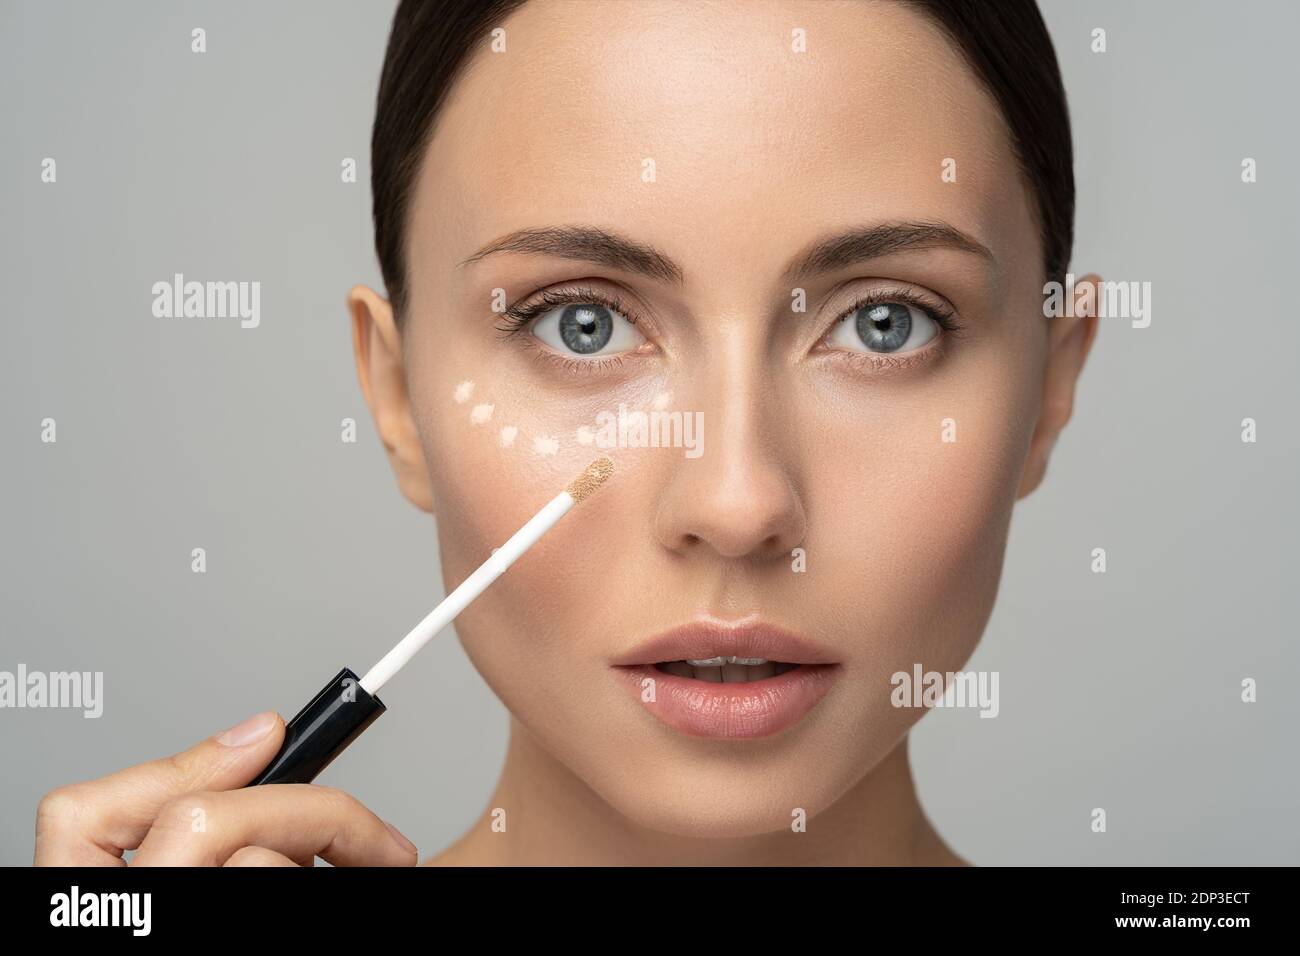 Close up of woman with natural makeup applying corrector on flawless fresh skin, doing make up. Girl after shower put concealer under eye area. Beauty Stock Photo